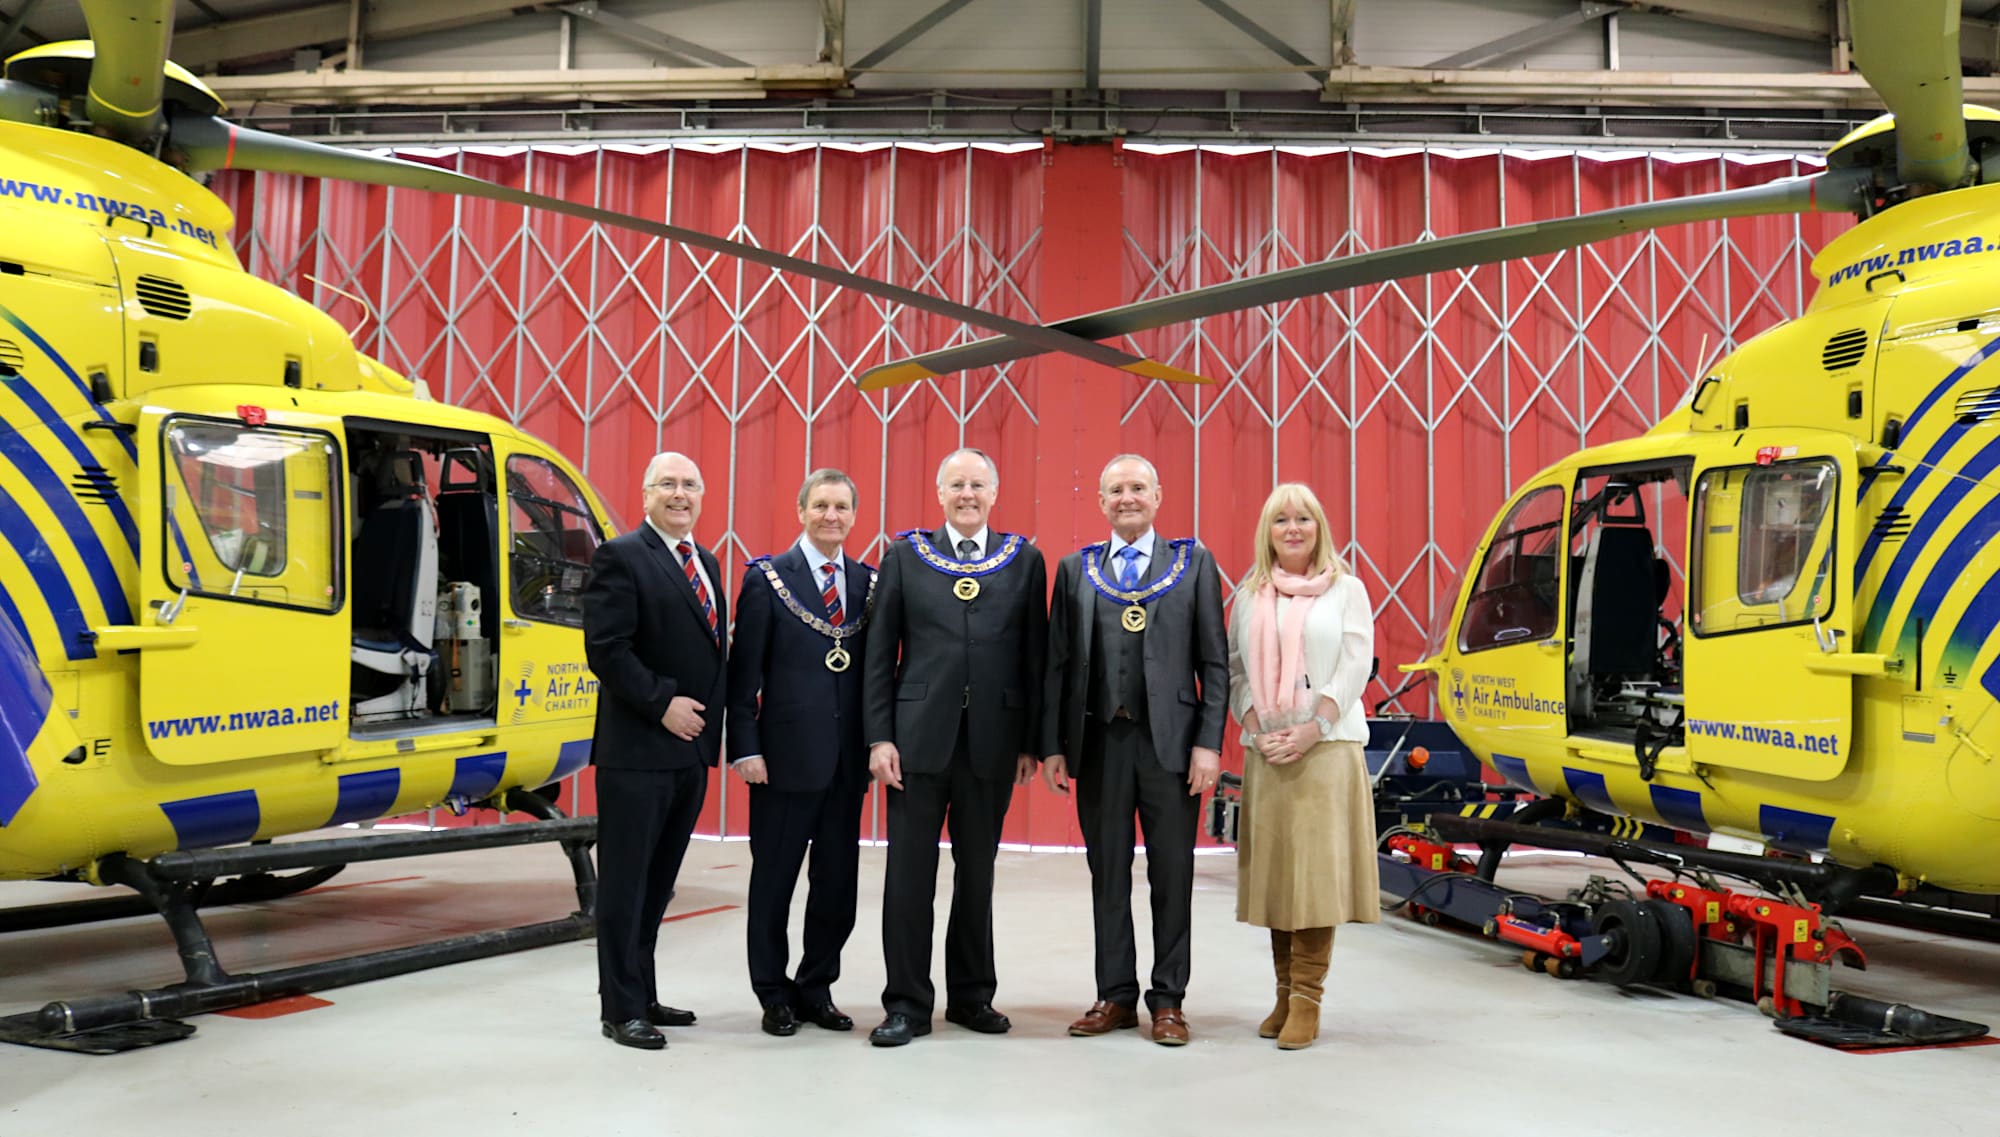 Provinces of Cheshire, East & West Lancashire come together for £12,000 North West Air Ambulance MCF Grant